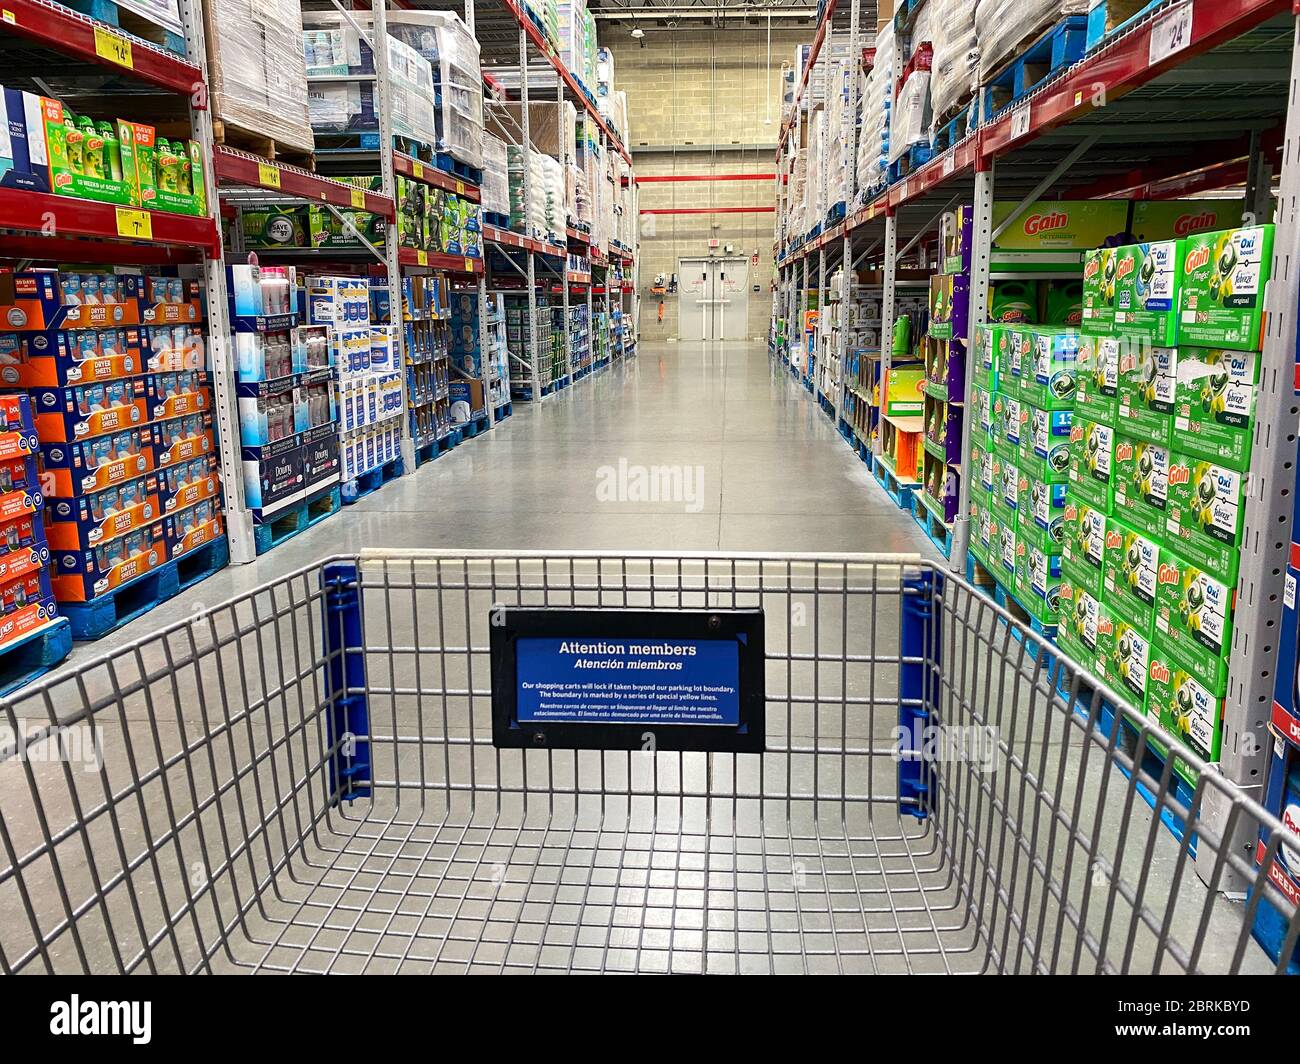 Orlando, FL/USA-2/11/20: The view from a cart of laundry products aisle of a Sams Club grocery store. Stock Photo